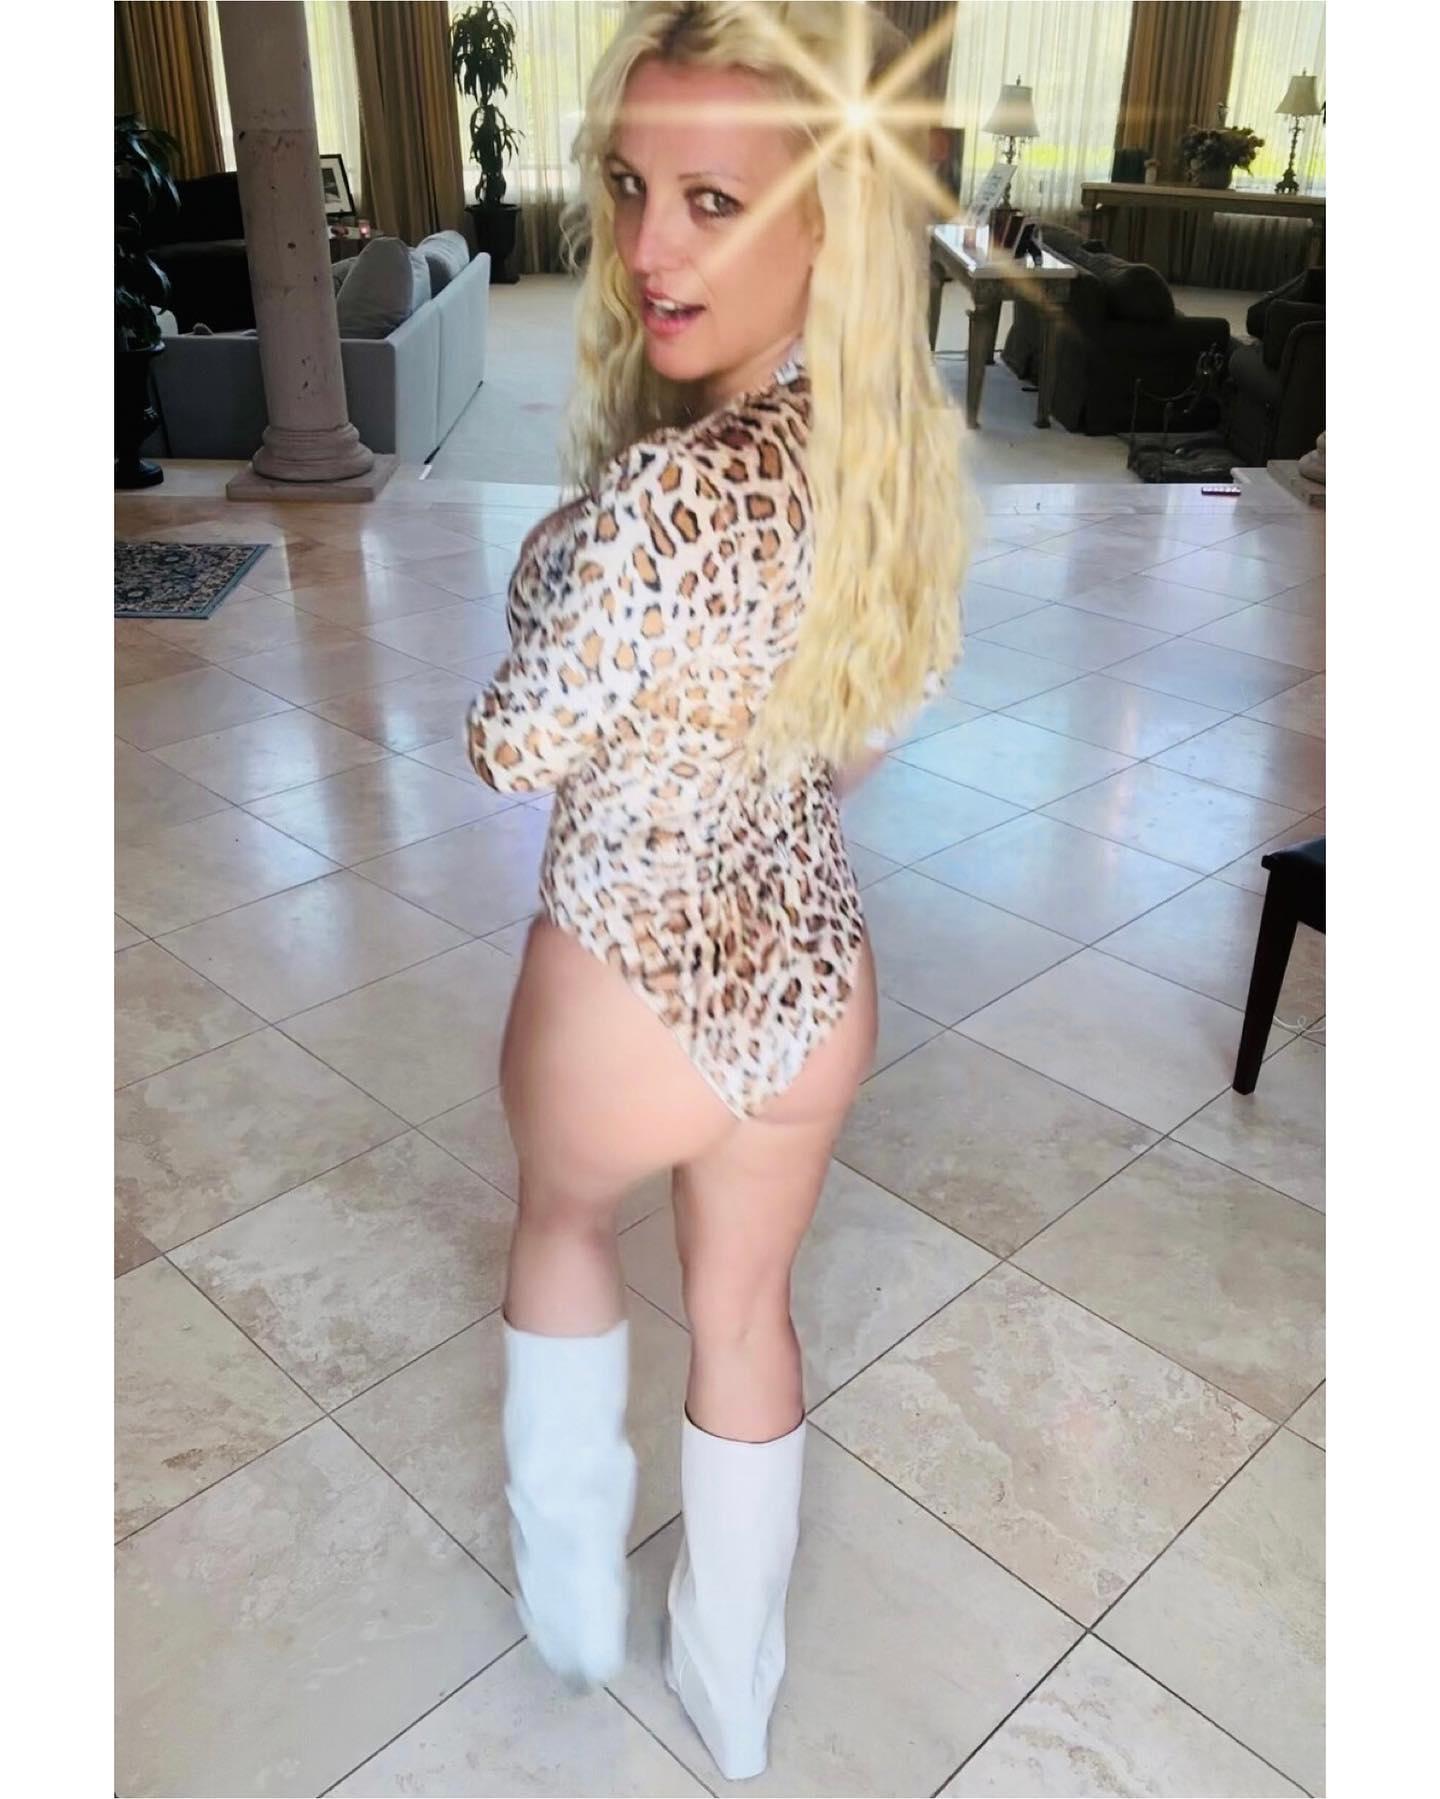 Britney Spears In Plunging Animal-Print Bodysuit Says ‘Just Me’